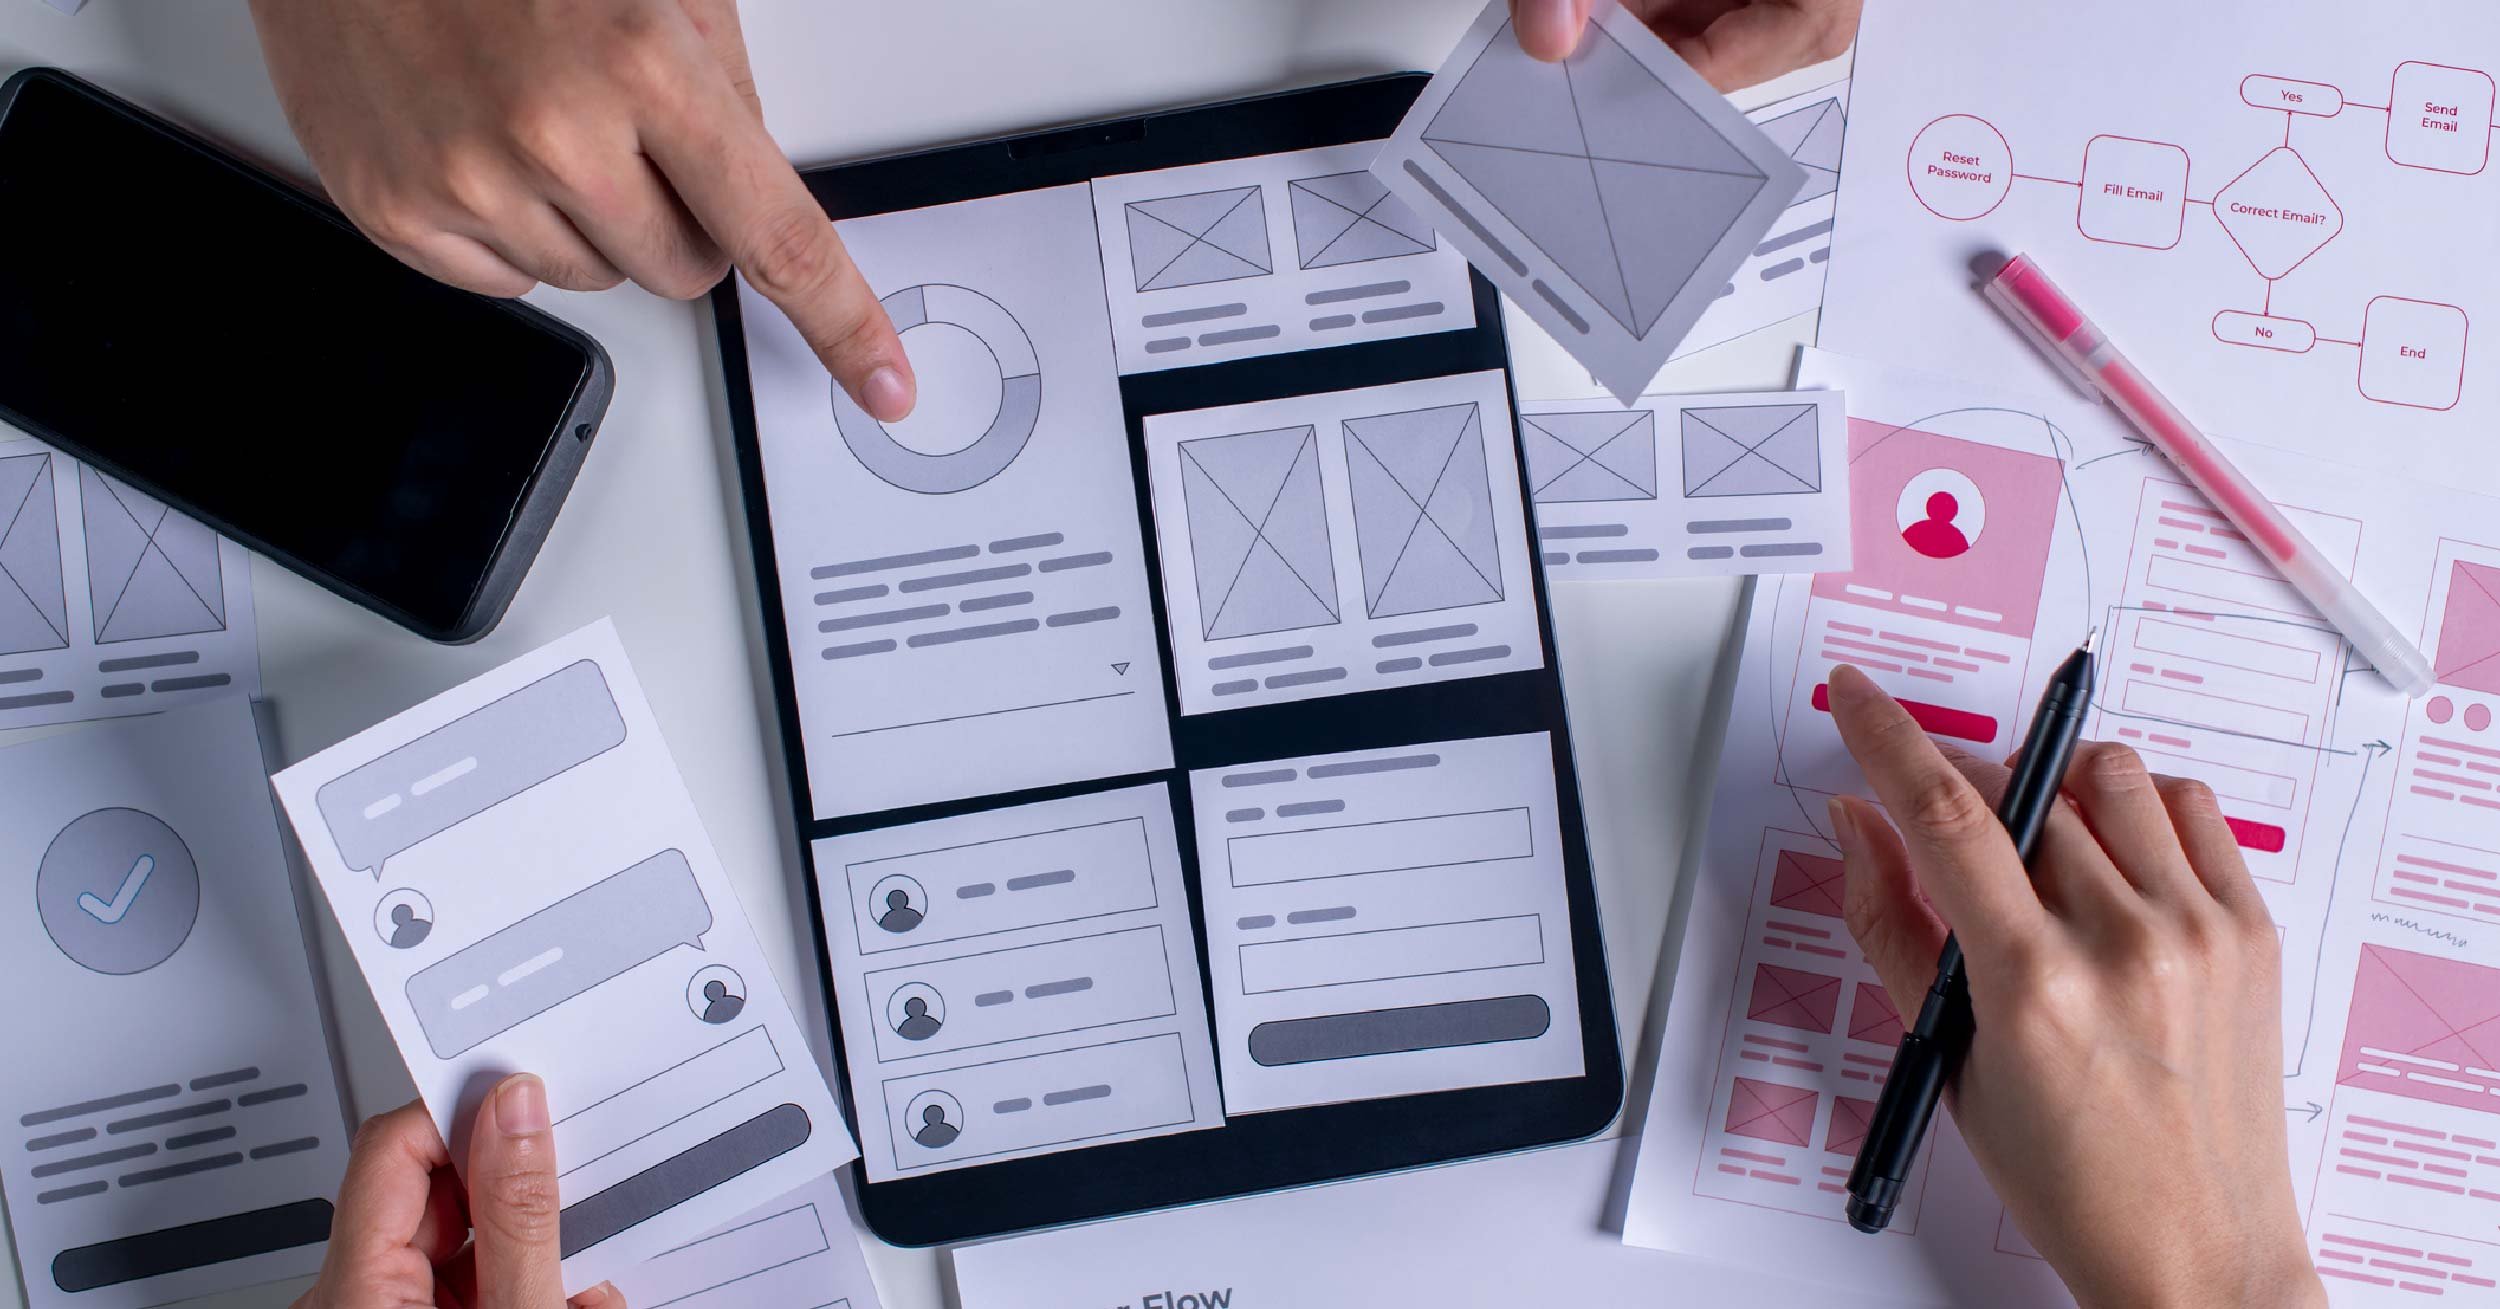 Web-designers-prioritizing-results-driven-design-during-wireframing